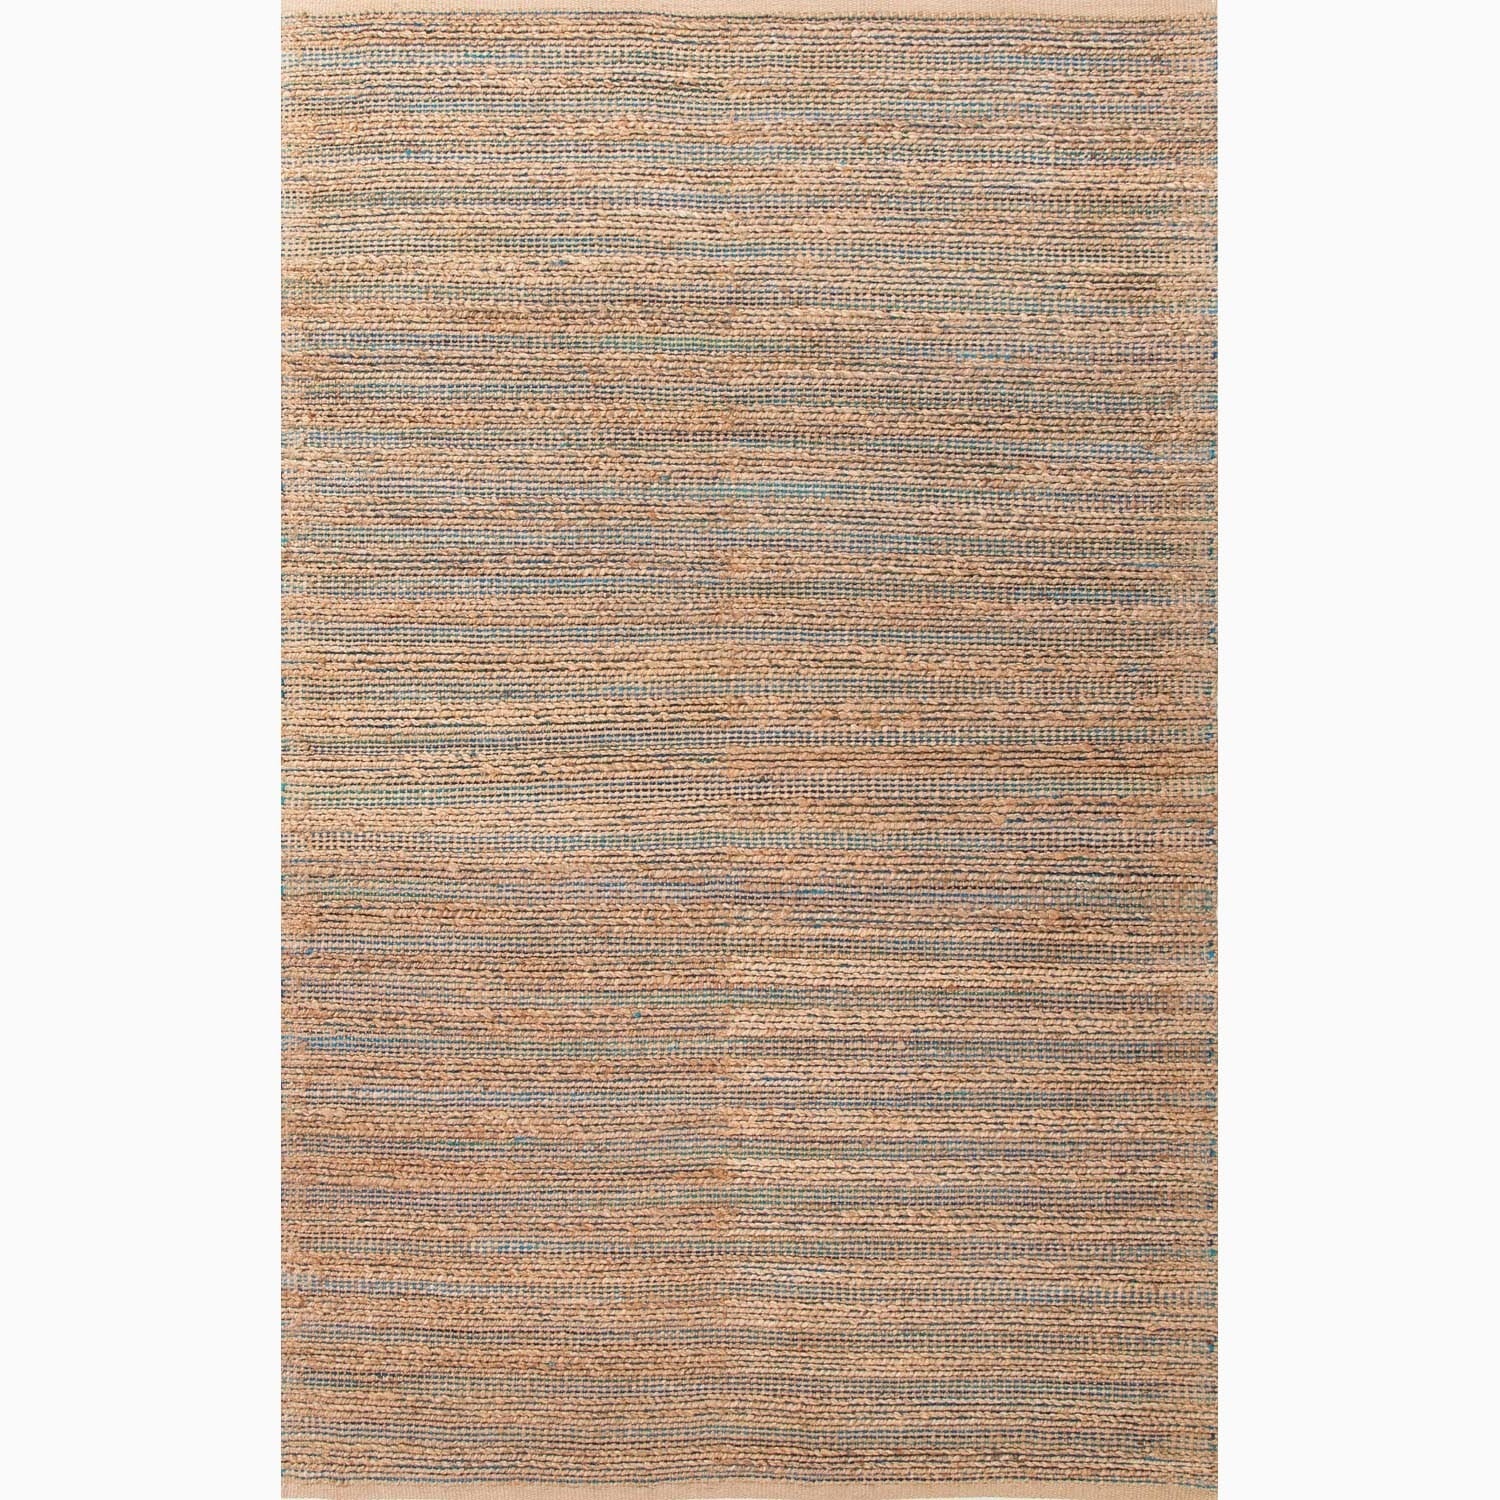 Hand made Solid Pattern Blue/ Tan Cotton/ Jute Rug (8x10)